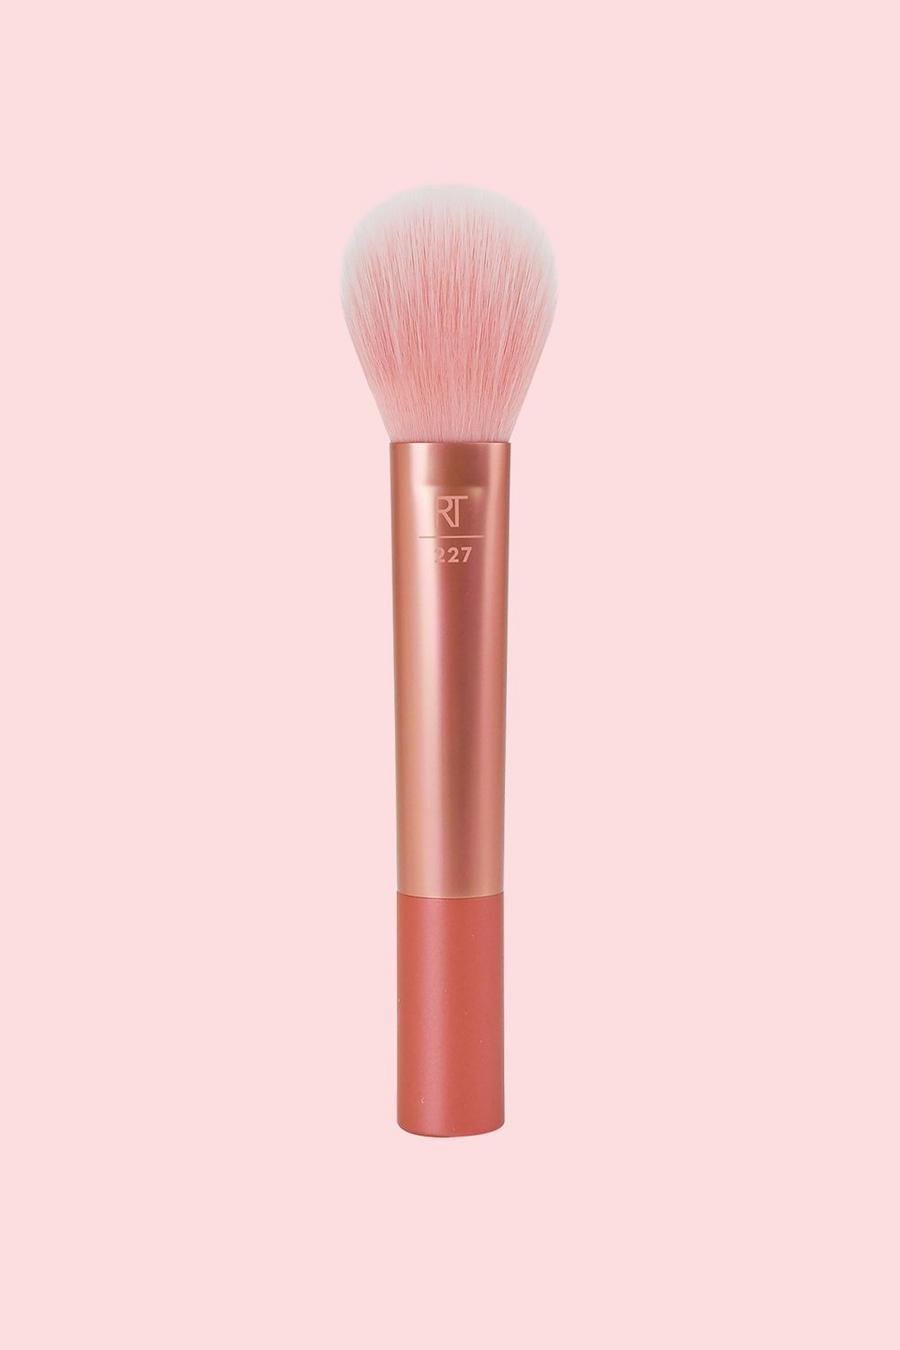 Pink rose REAL TECHNIQUES LIGHT LAYER POWDER MAKEUP BRUSH